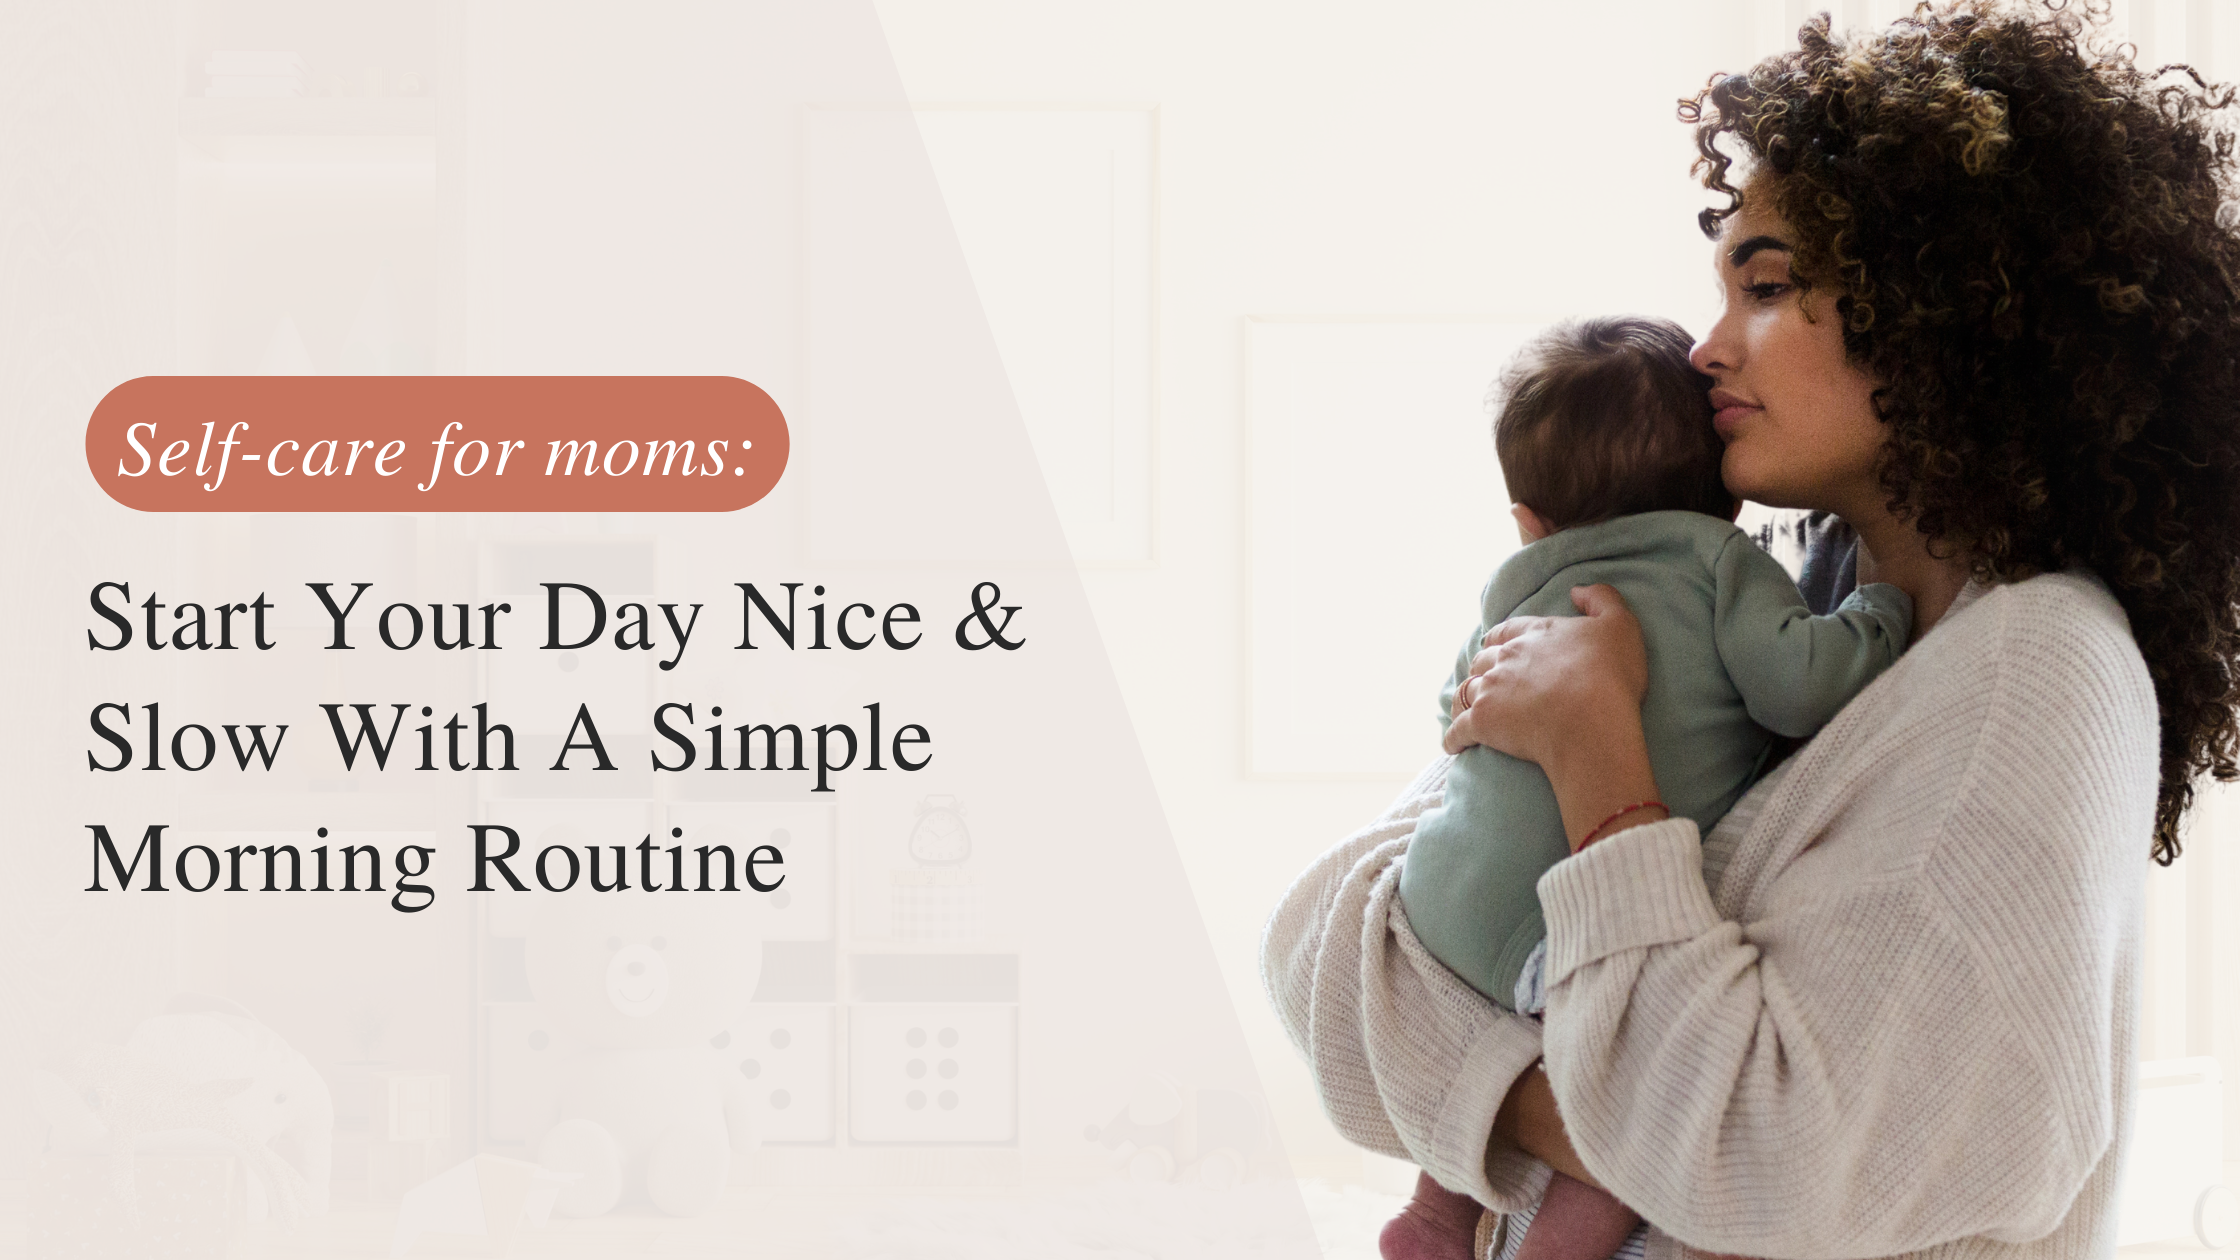 10-minute Morning Self-care Routines For Busy Moms